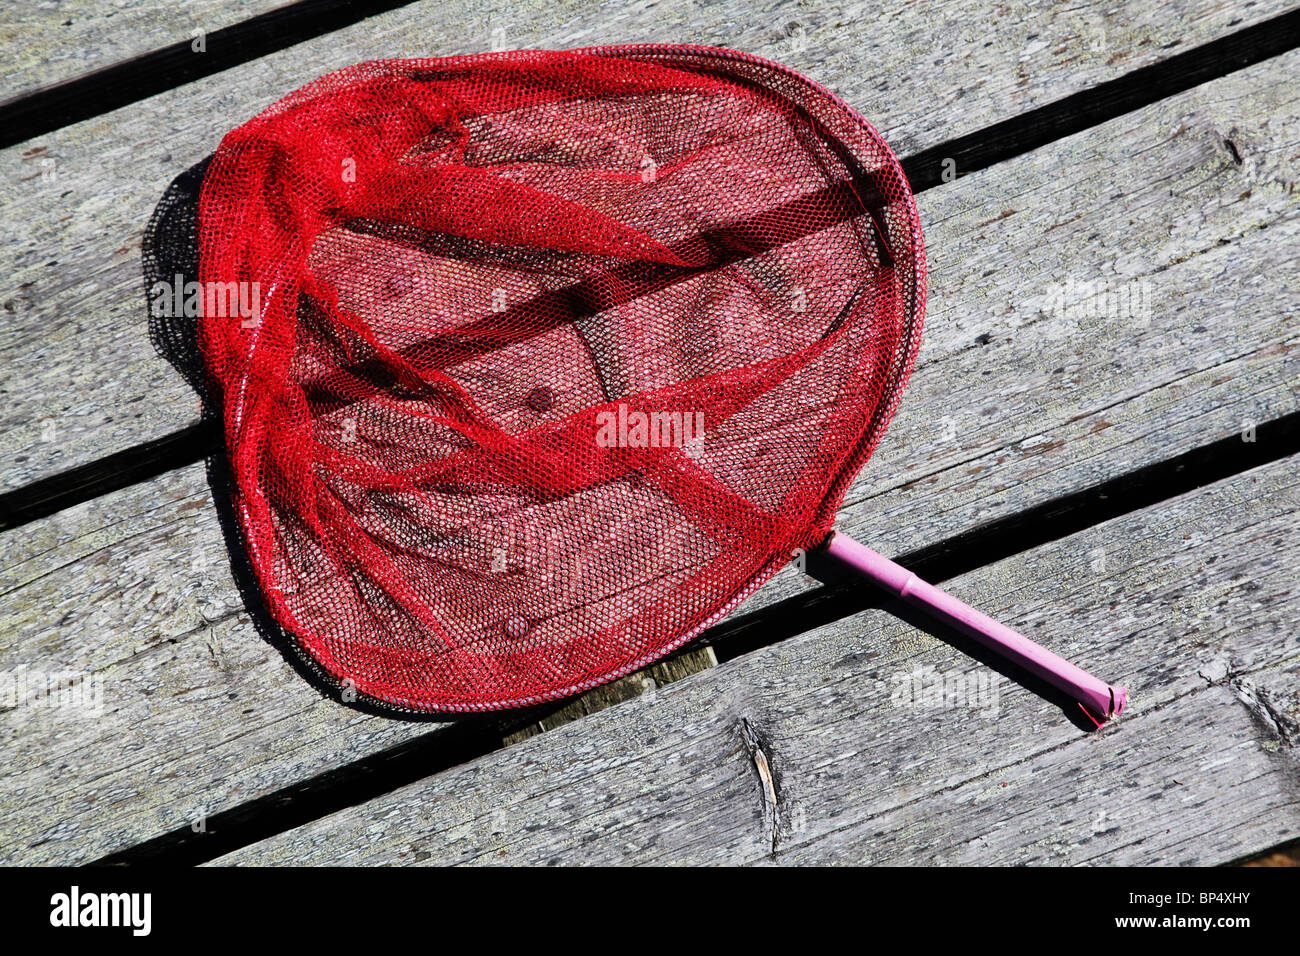 Bright pink red child's fishing or butterfly net lying on a wooden pier Stock Photo